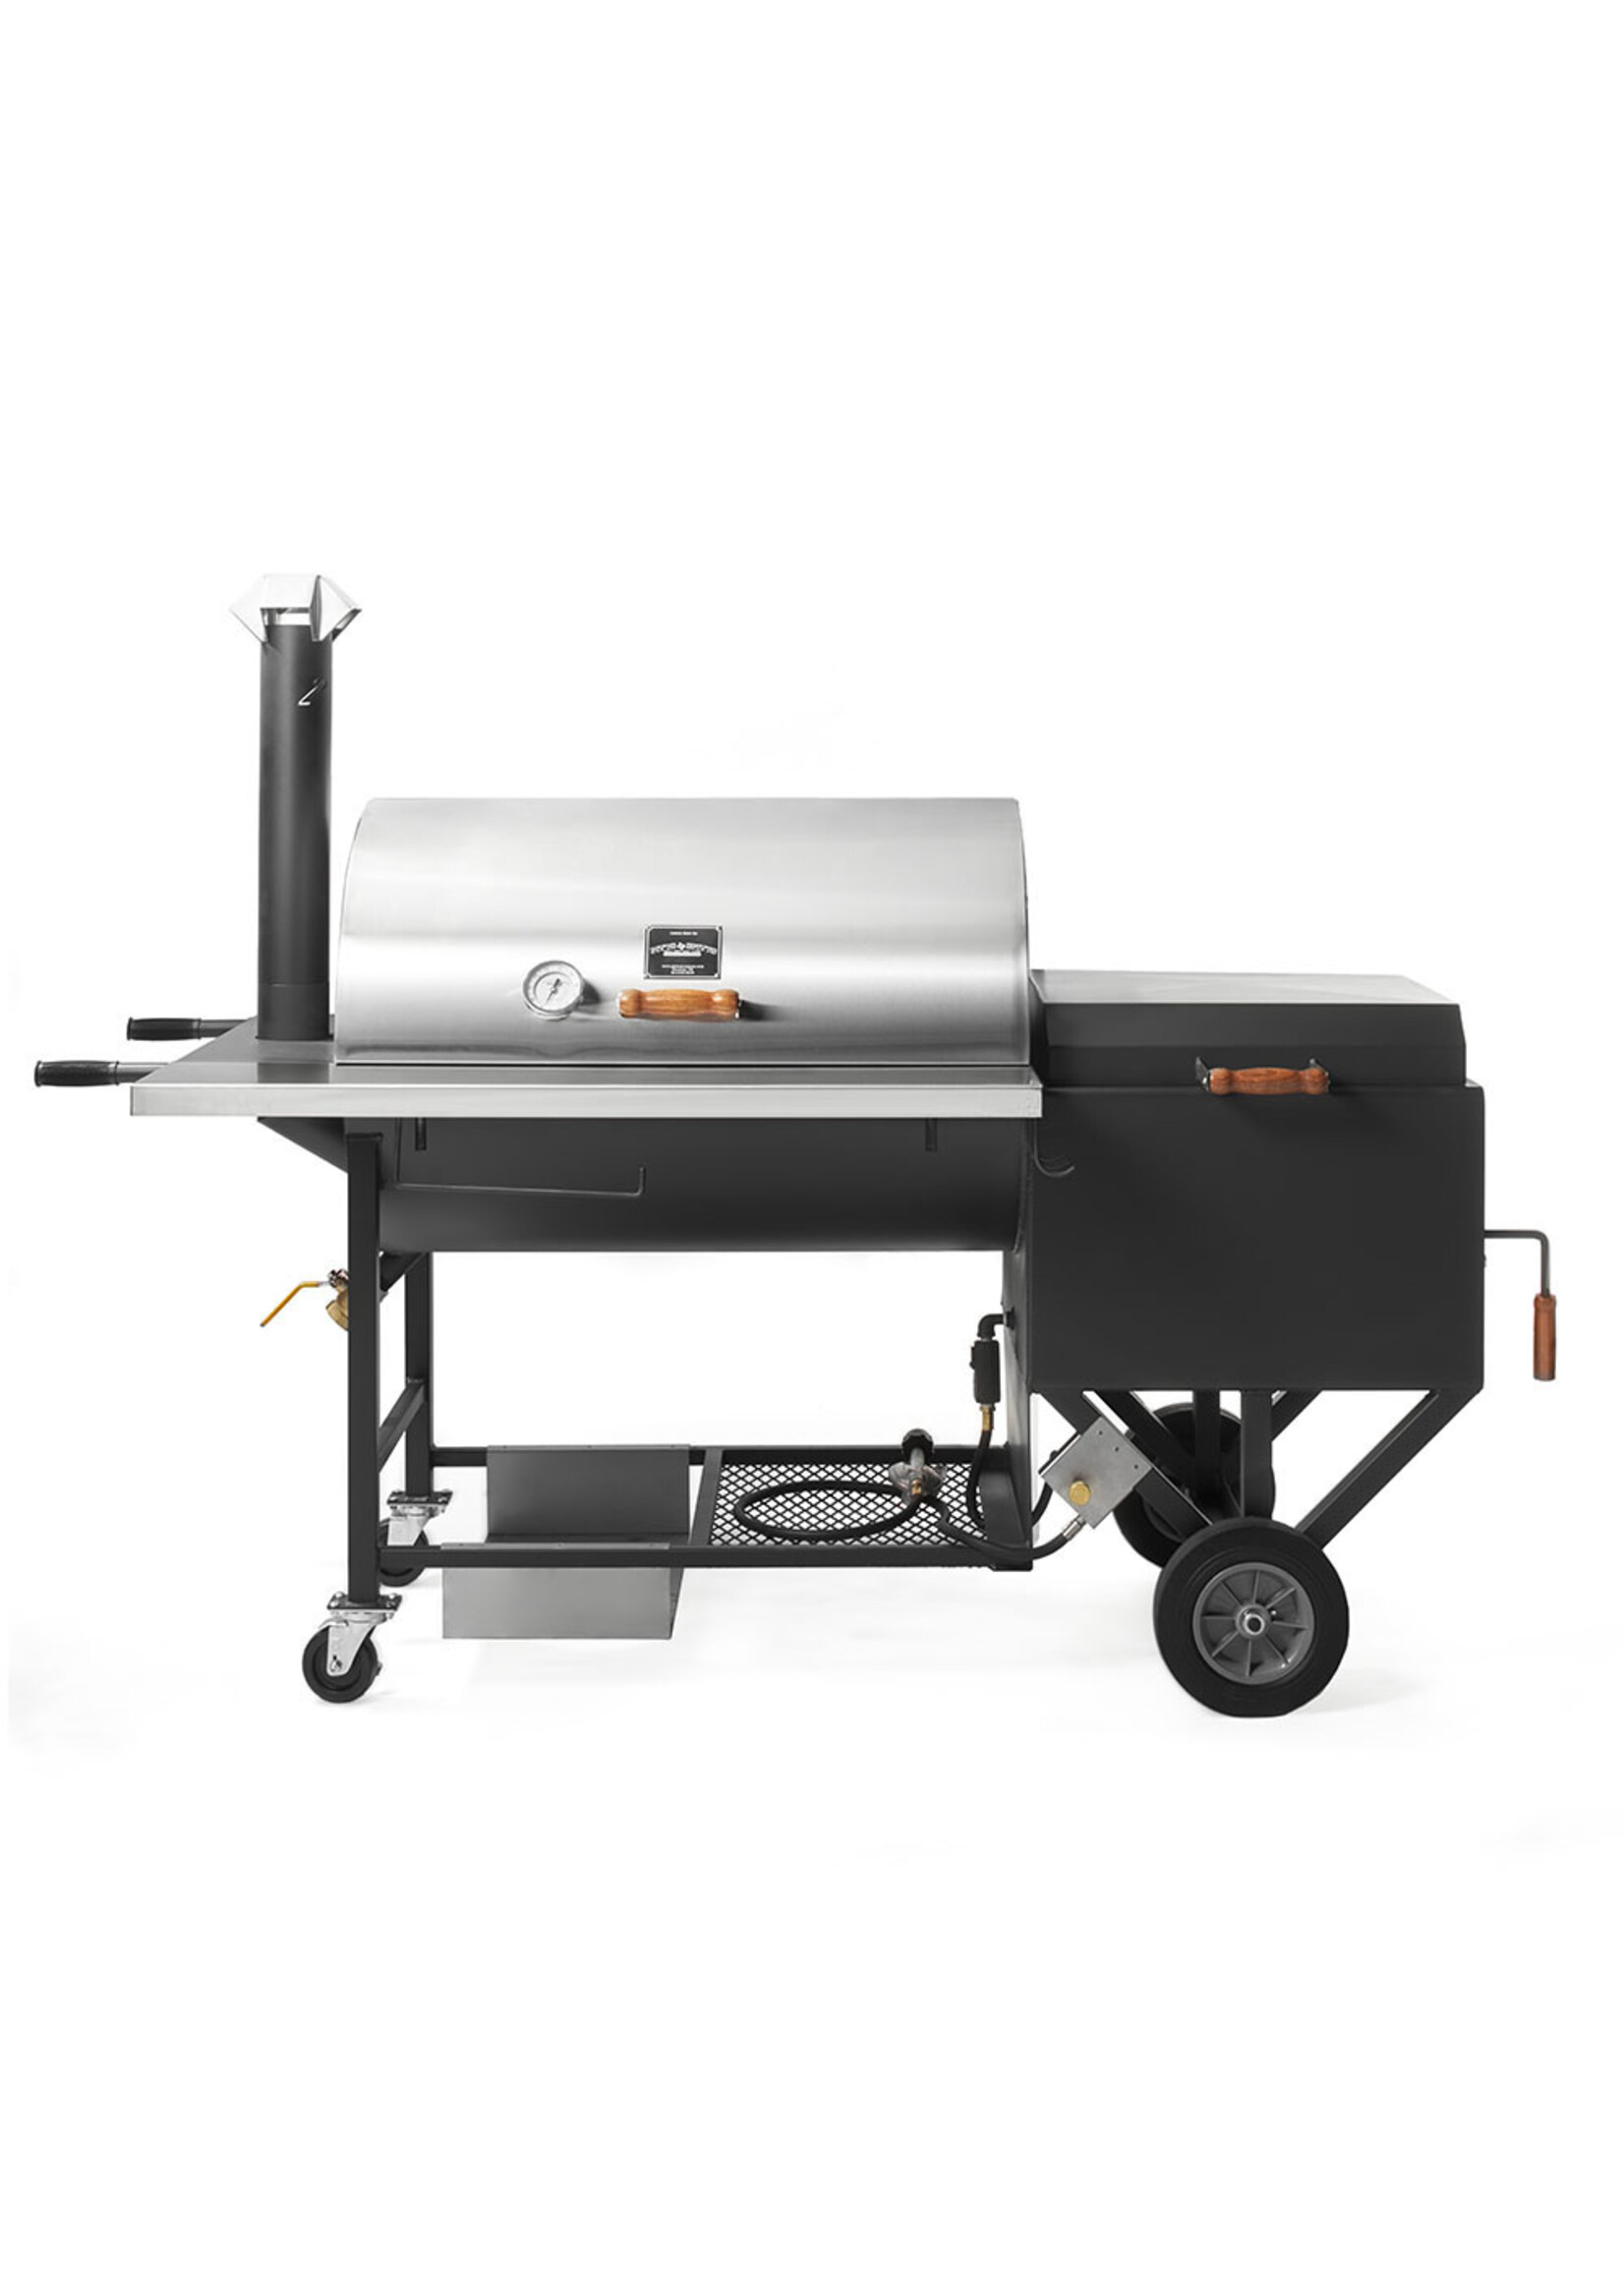 Pitts & Spitts Pitts & Spitts Ultimate Smoker Pit 24x36"